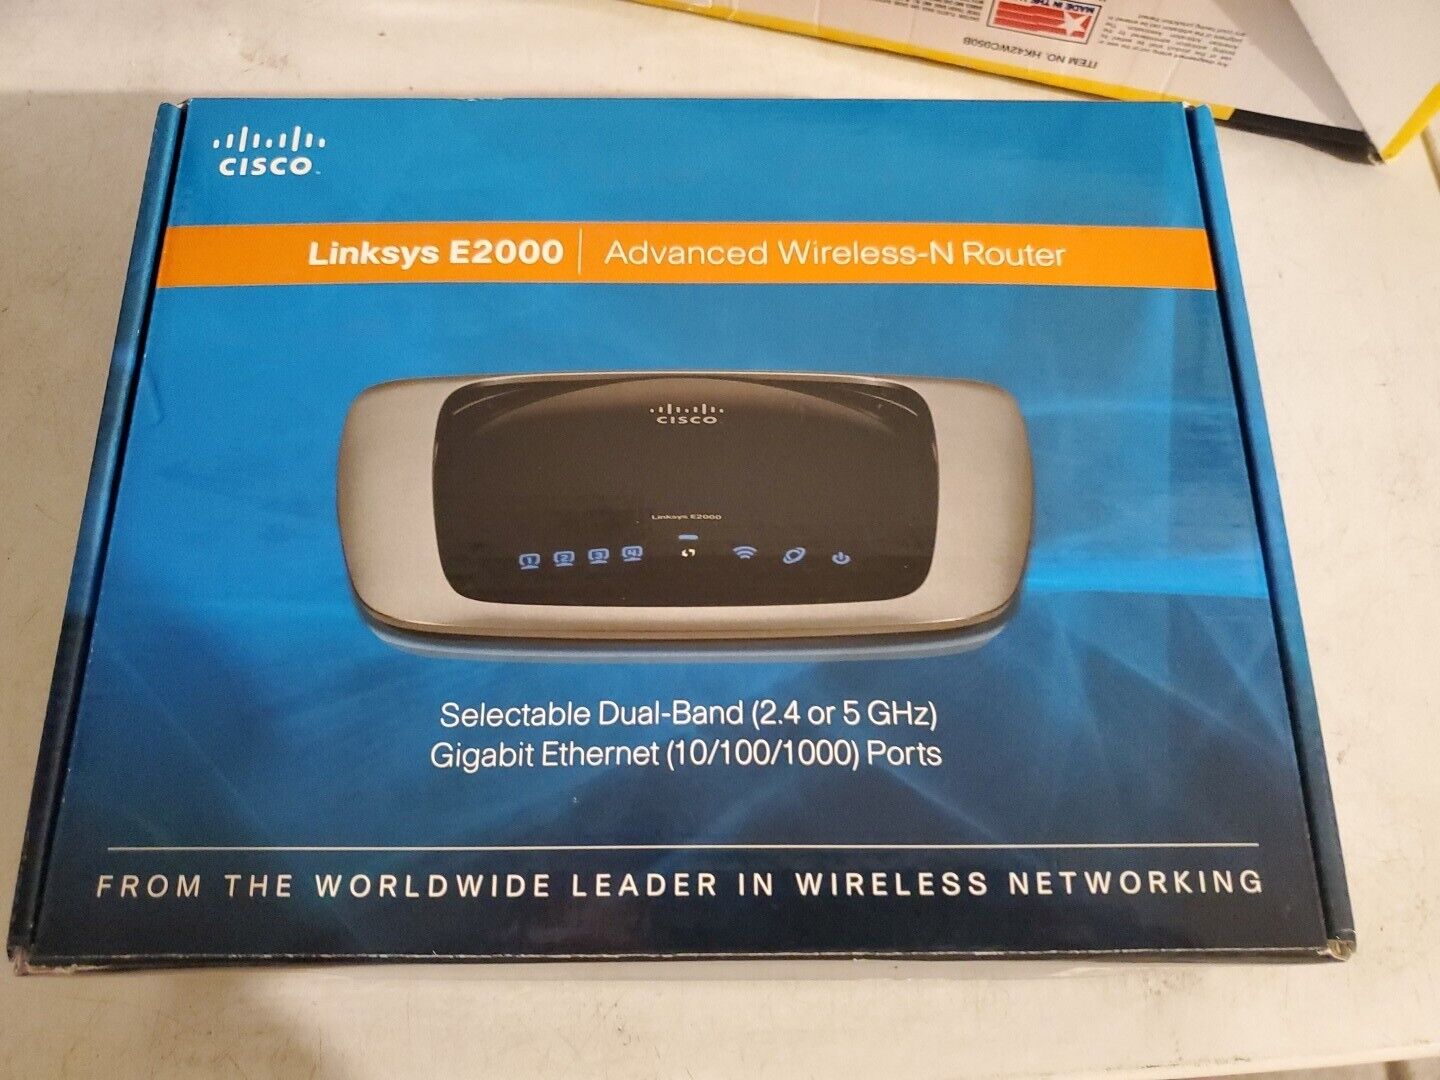 Cisco-Linksys E2000 Advanced Wireless-N Router - 300 Mbps - VPN support